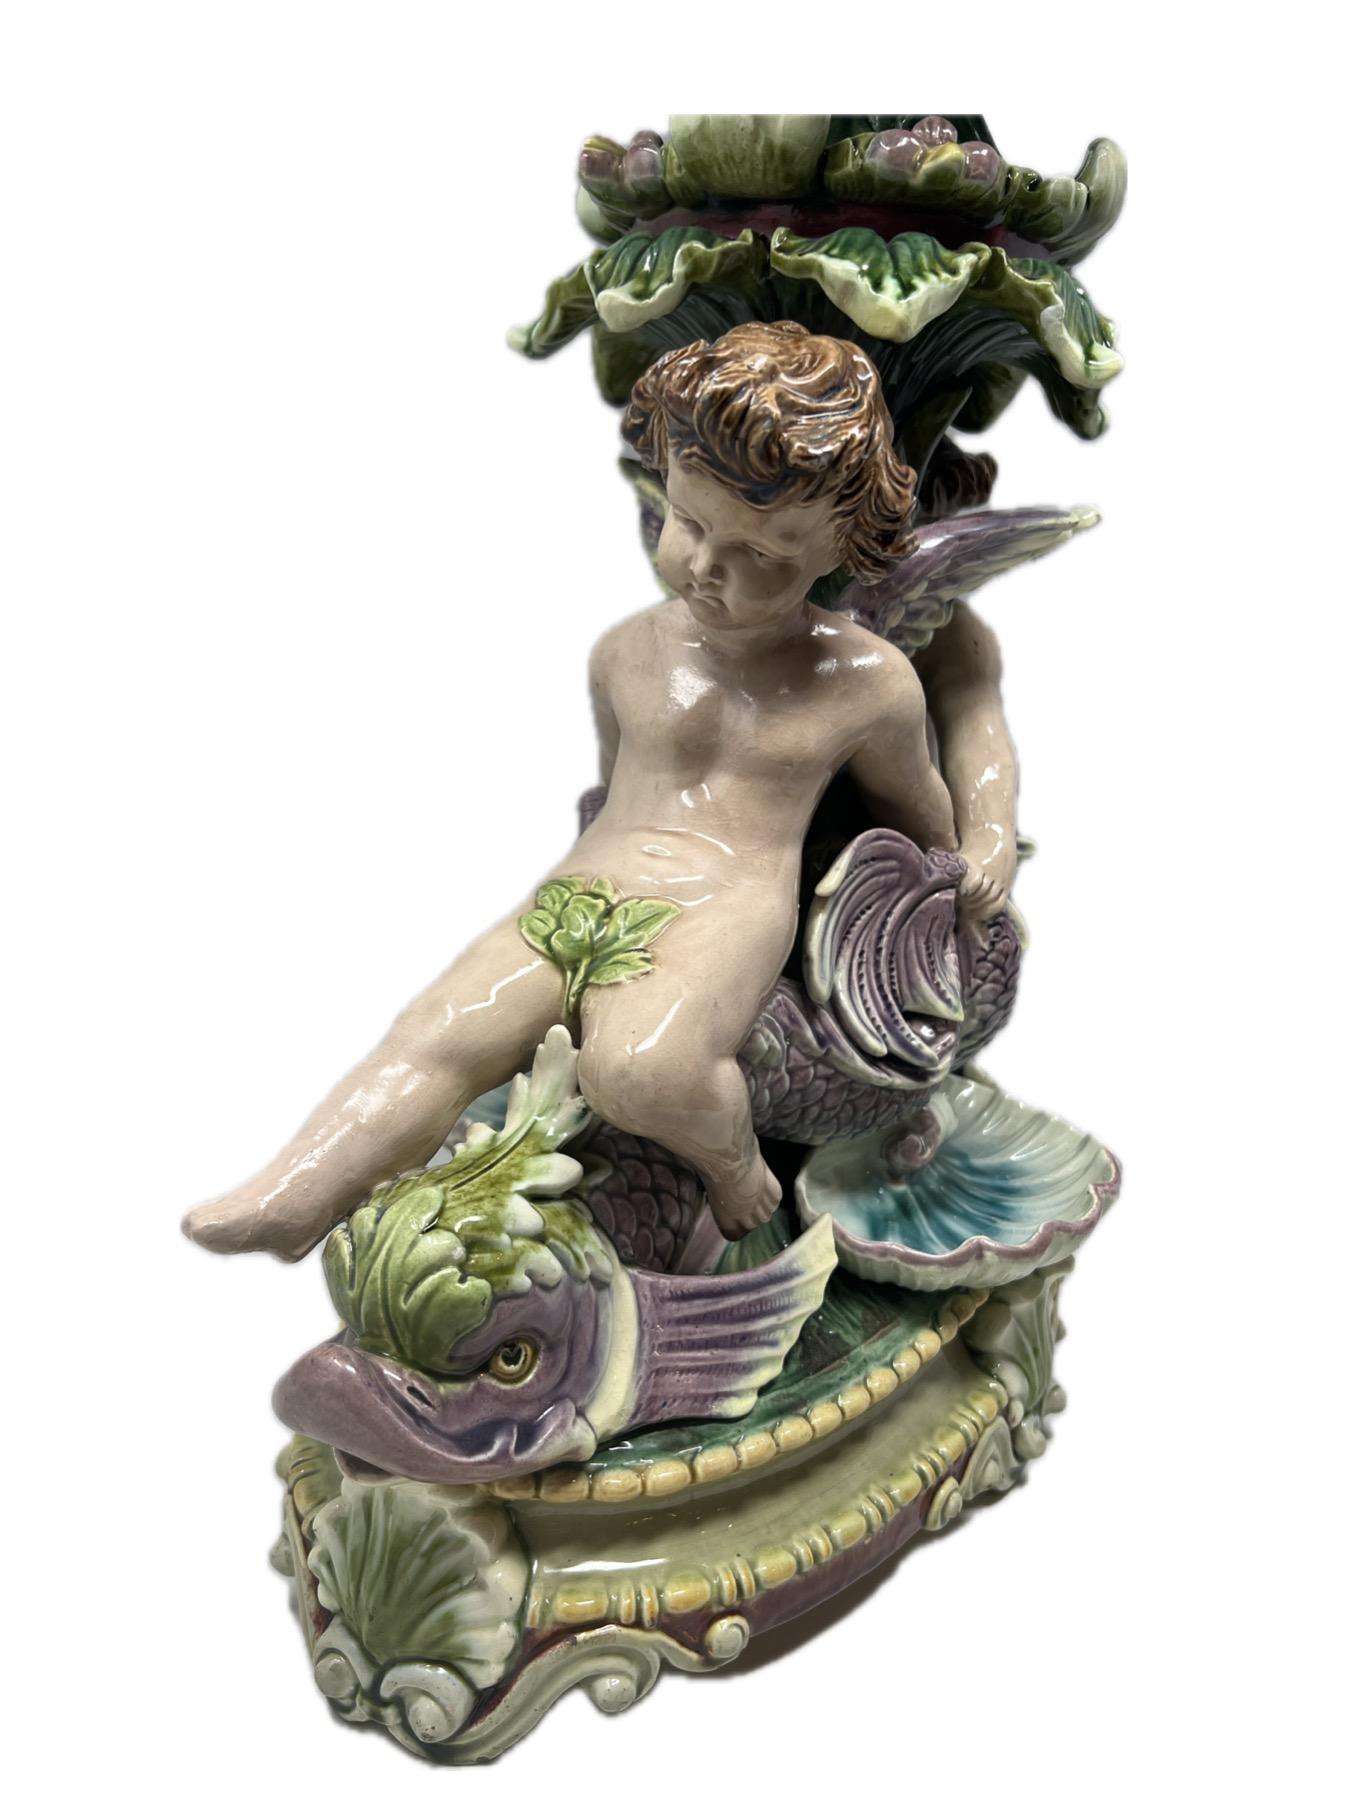 Substantial Size Antique French Majolica Porcelain Hand-Painted Centerpiece with Putti, Circa 1890-1910.